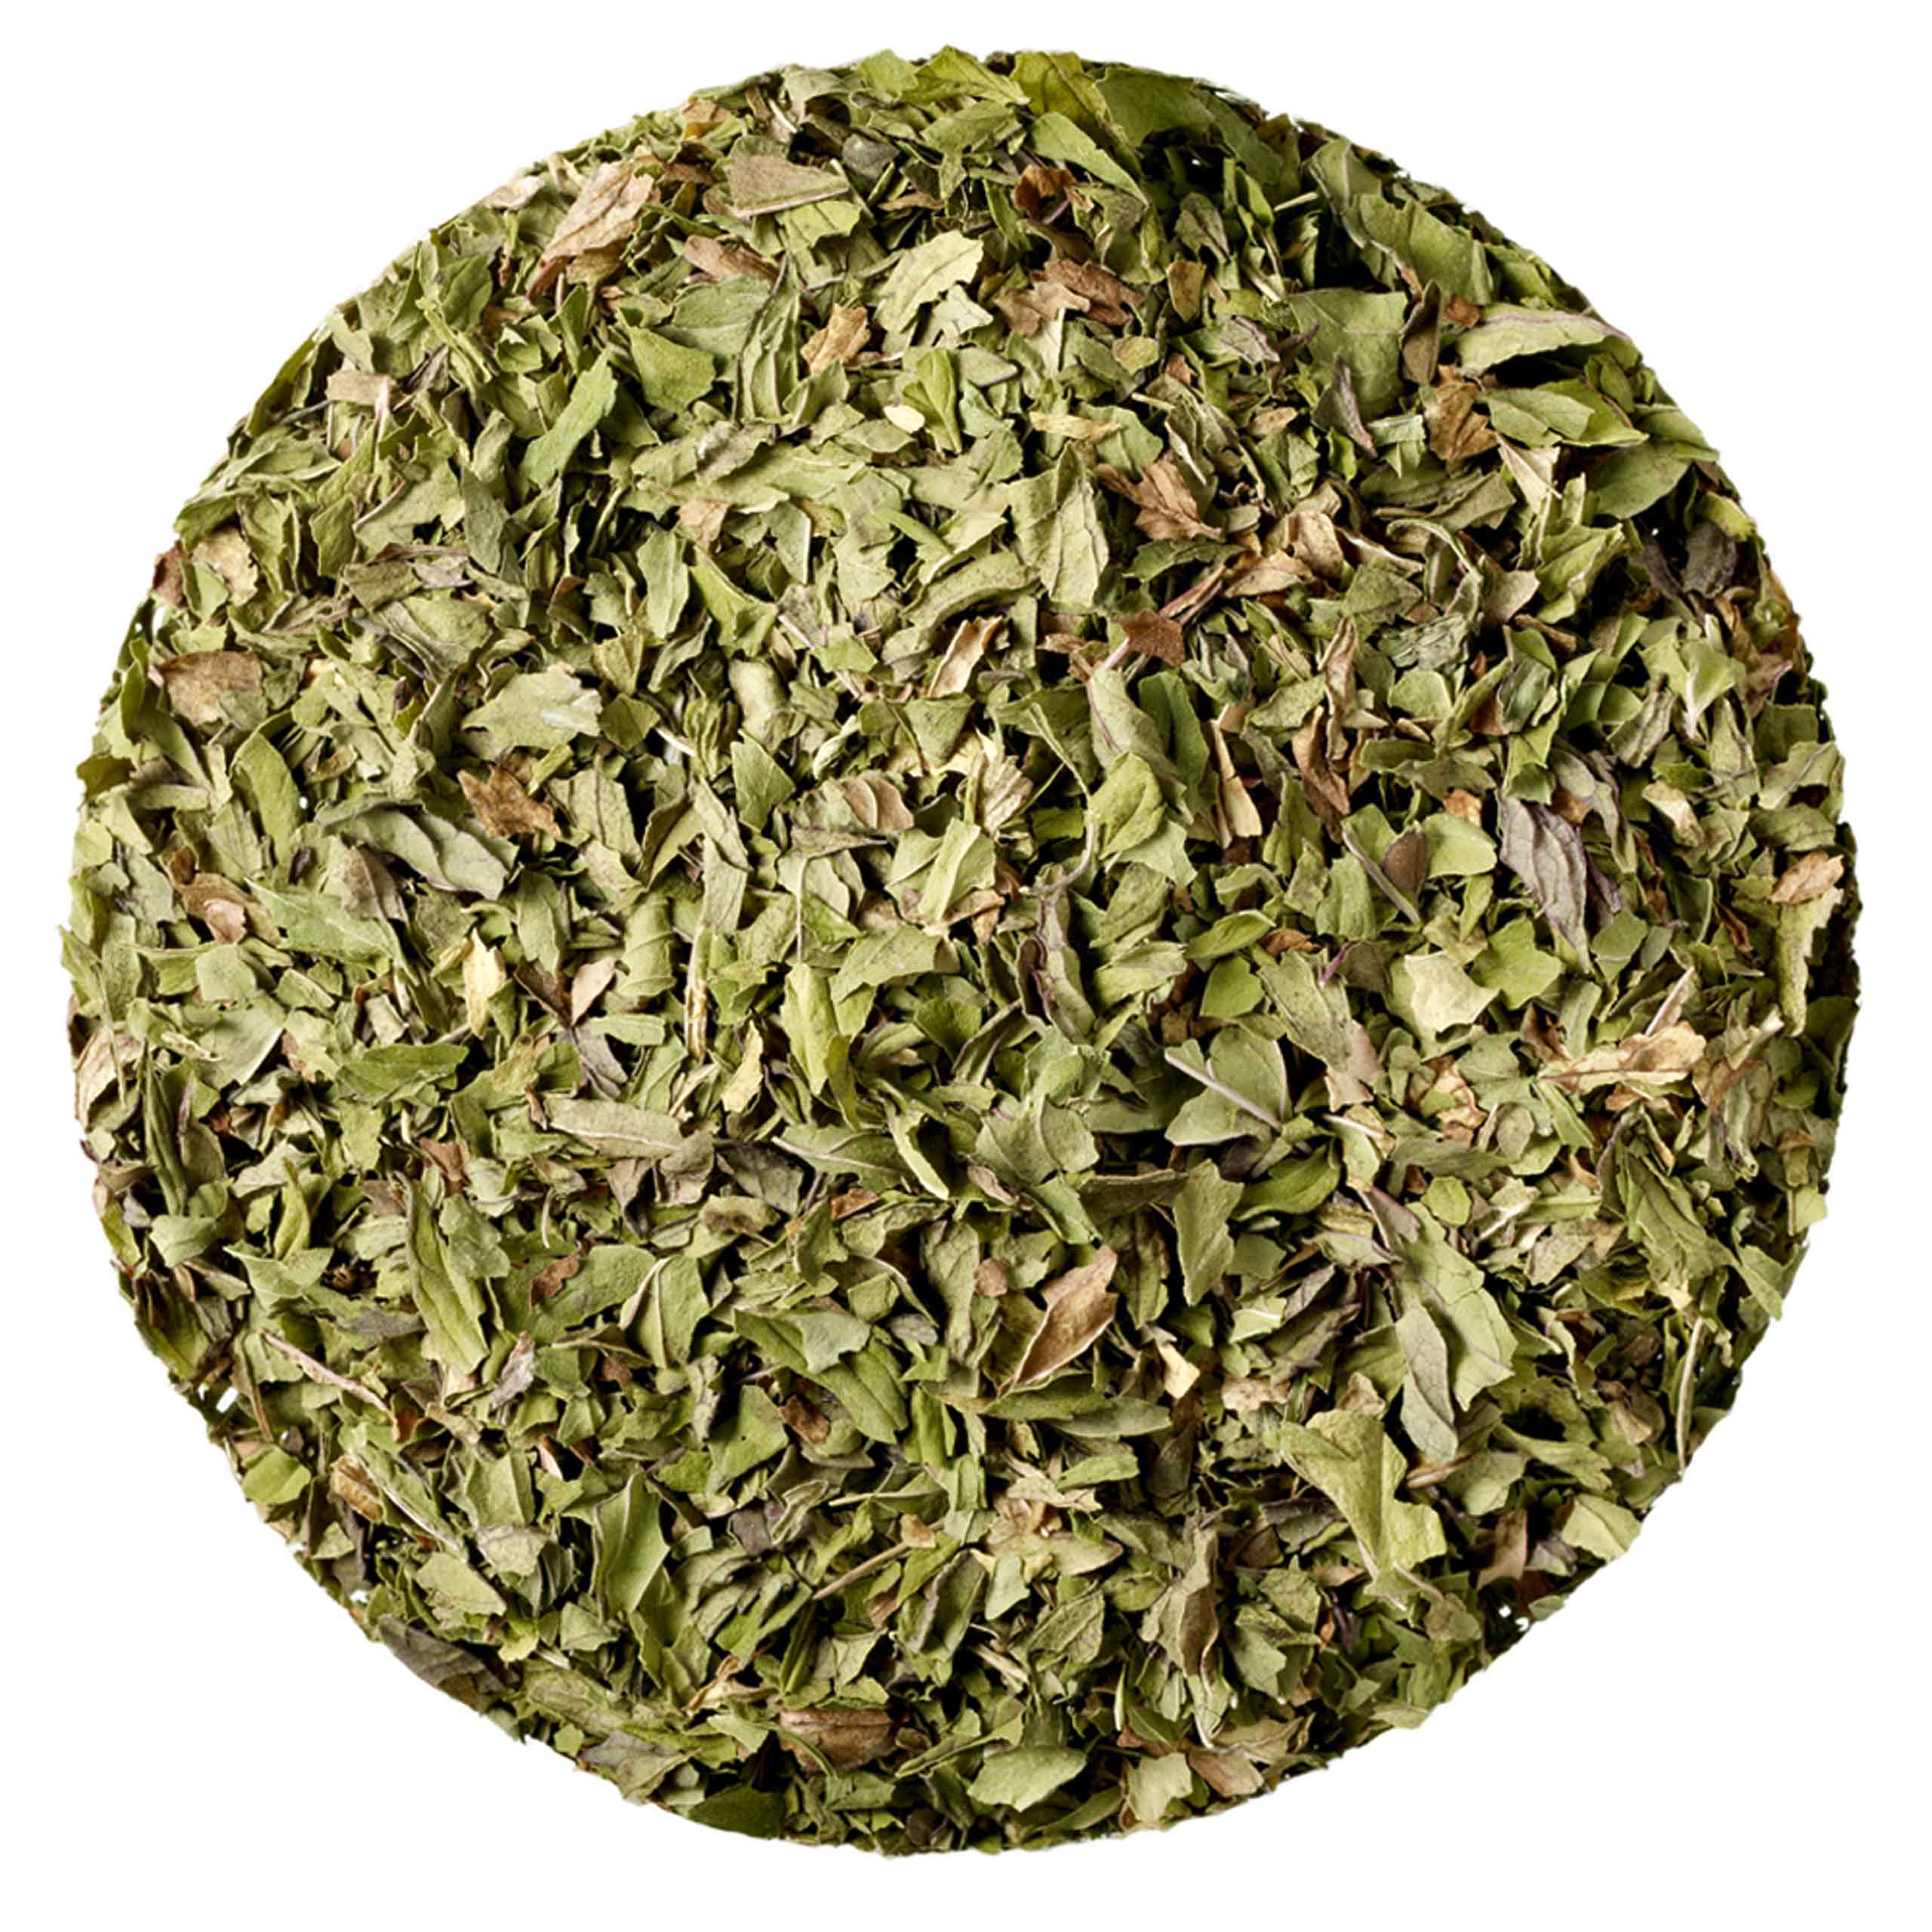 Composition of the Master Mint tea